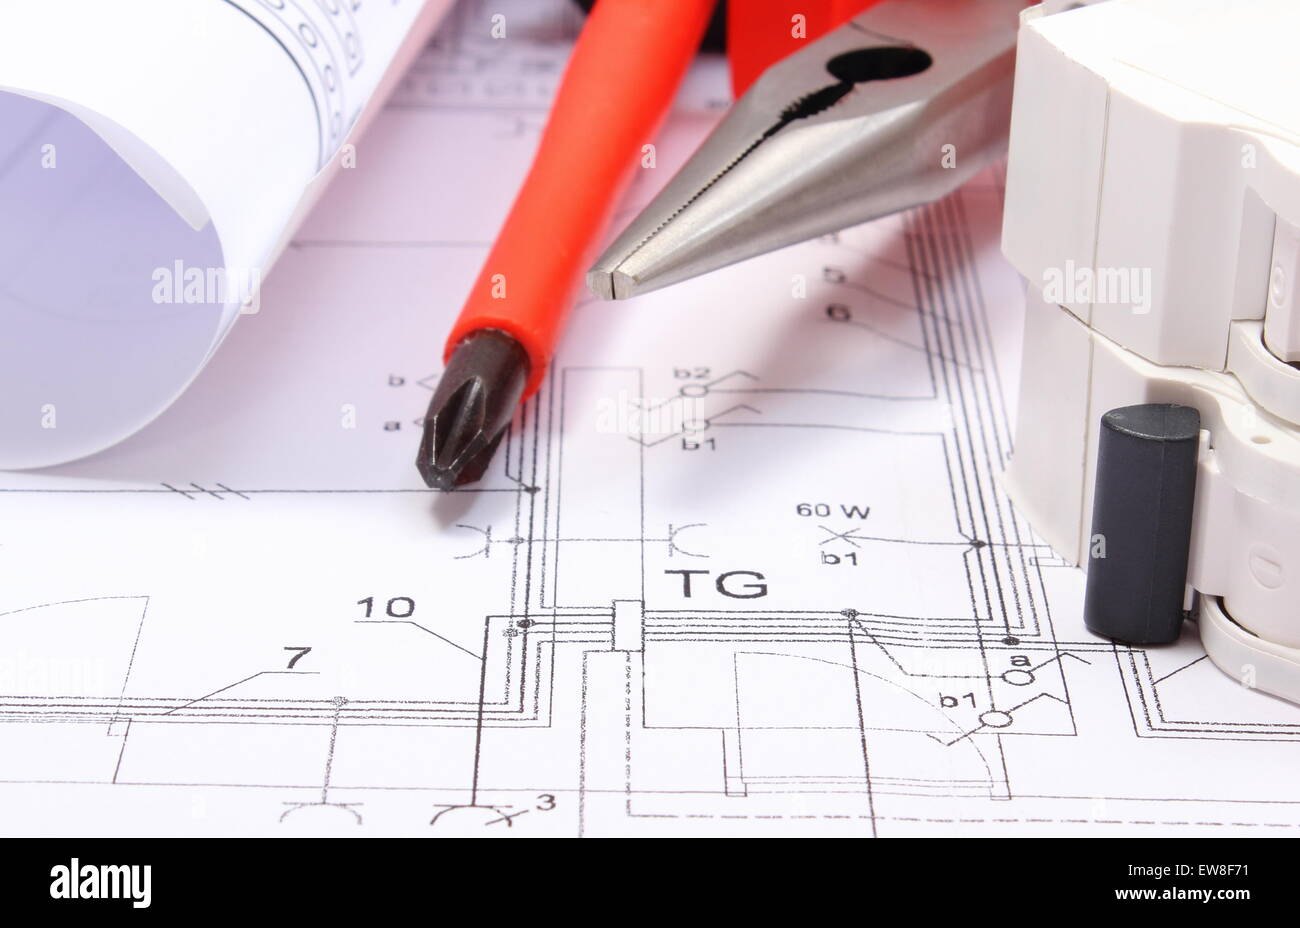 Rolls of electrical diagrams, electric fuse and work tools lying on construction drawing of house, Stock Photo